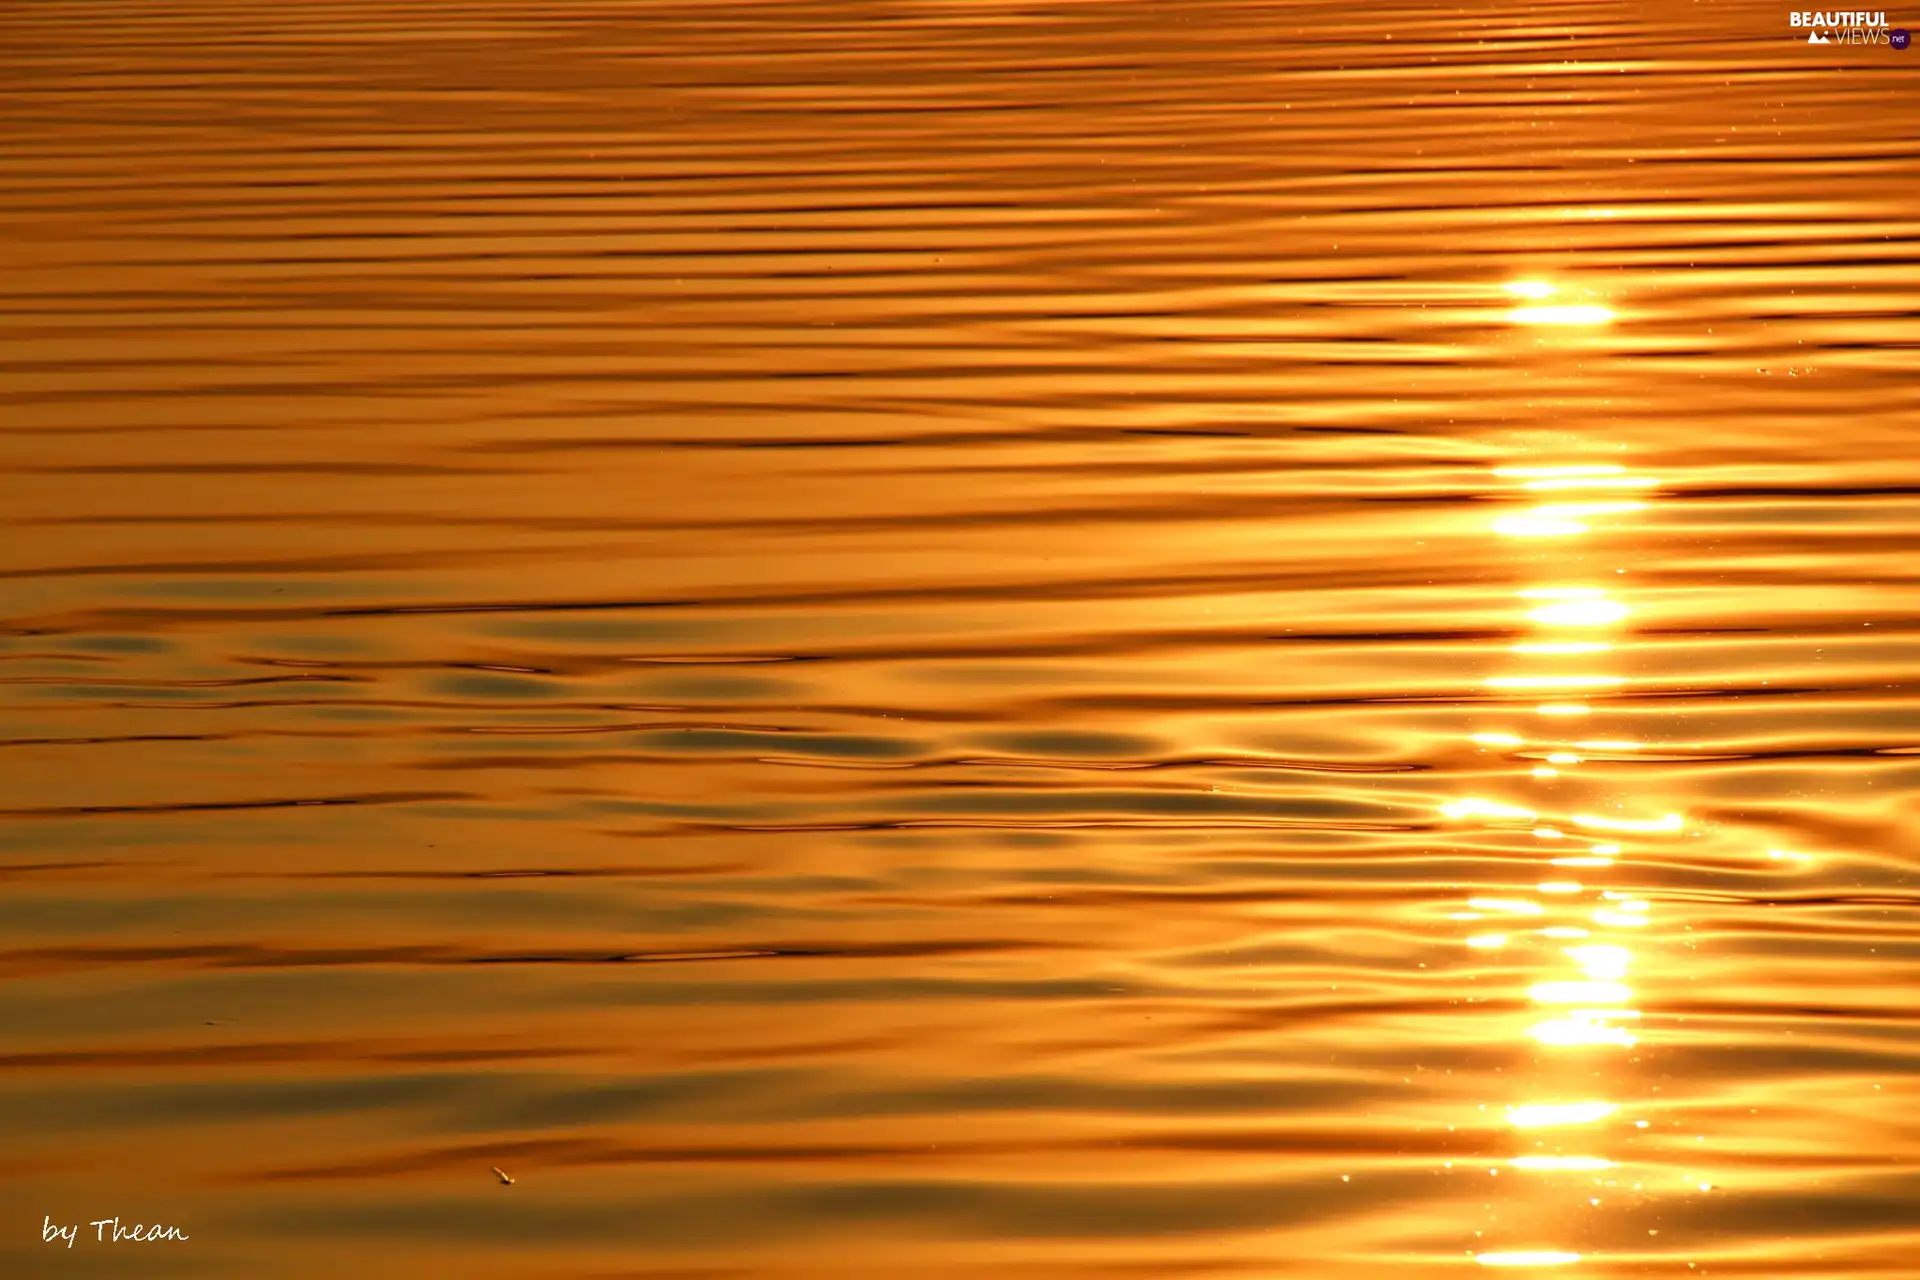 ##, water, sun, reflection, west